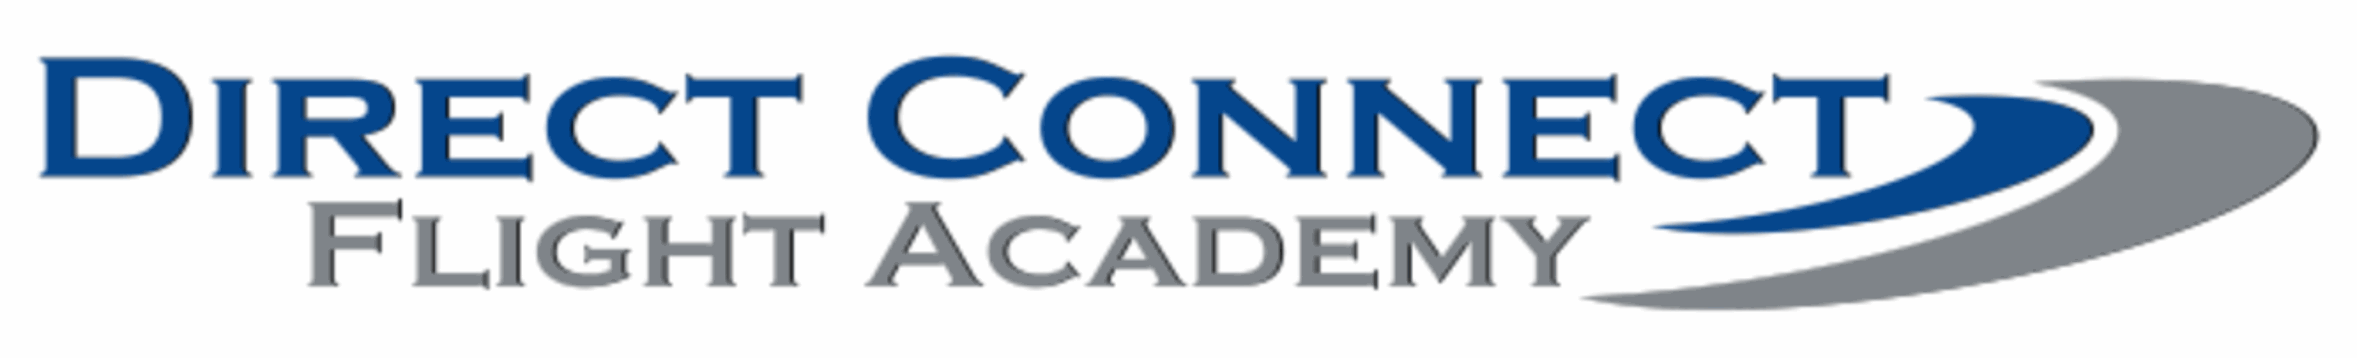 Direct Connect Flight Academy